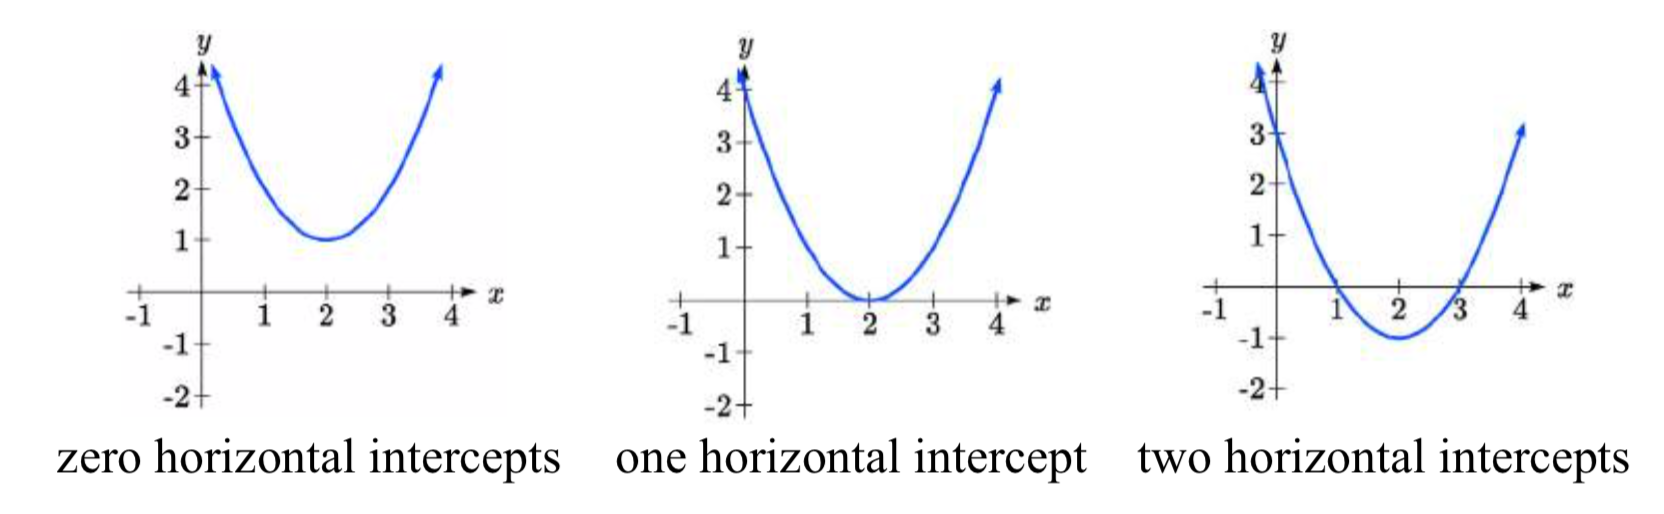 Examples of quadratic functions with no, one, or two x-intercepts